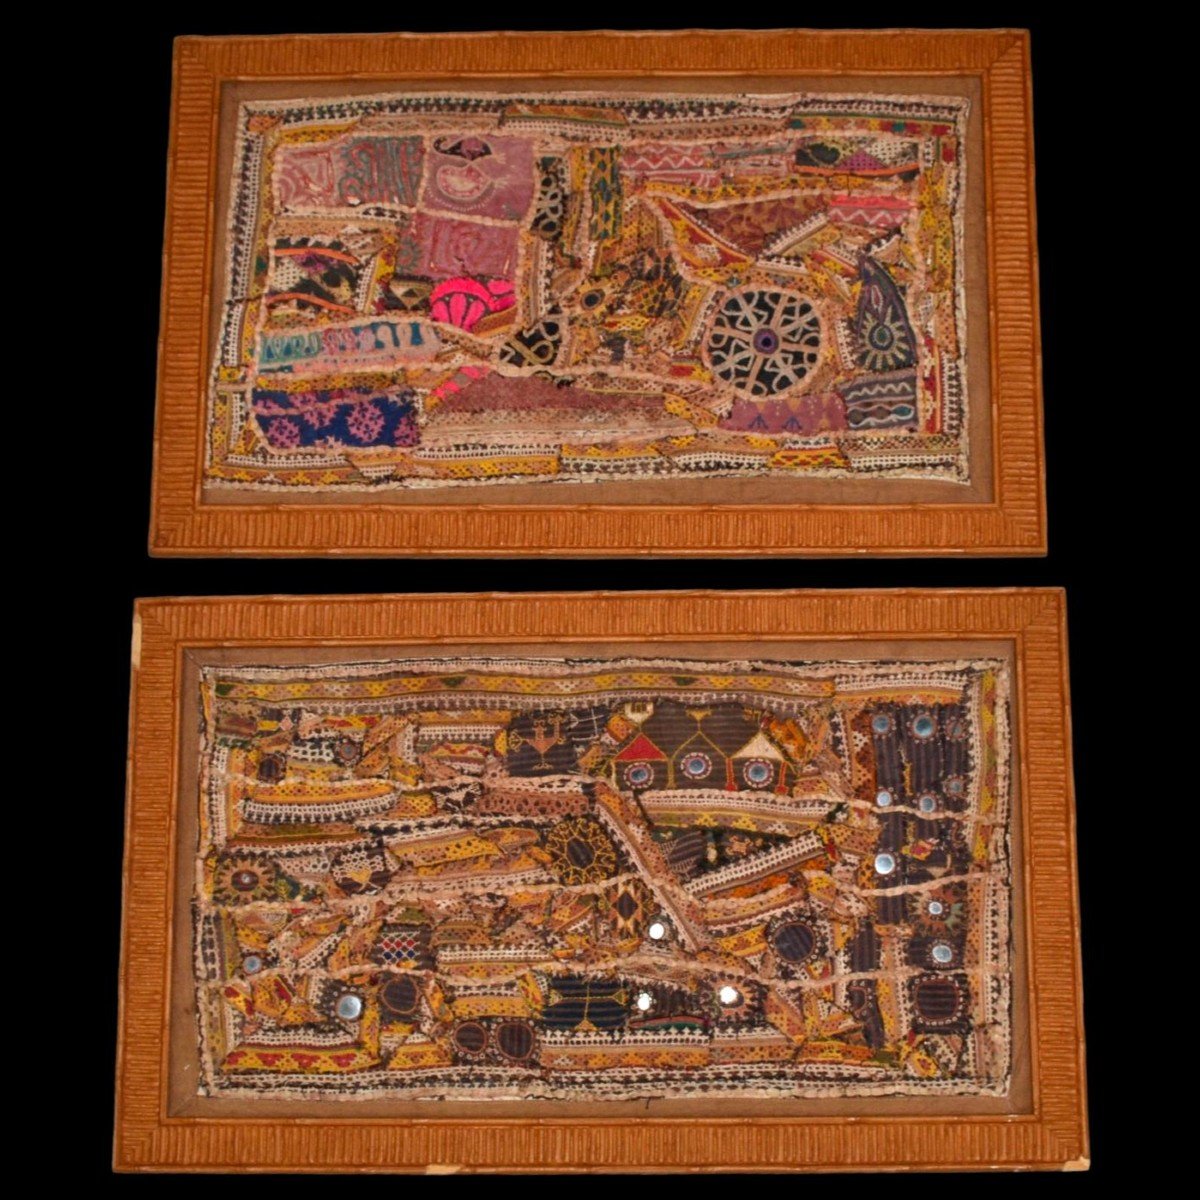 Two Old Framed Mirror Or Sheesha Embroidery, India, 49 Cm X 79 Cm, 19th Century